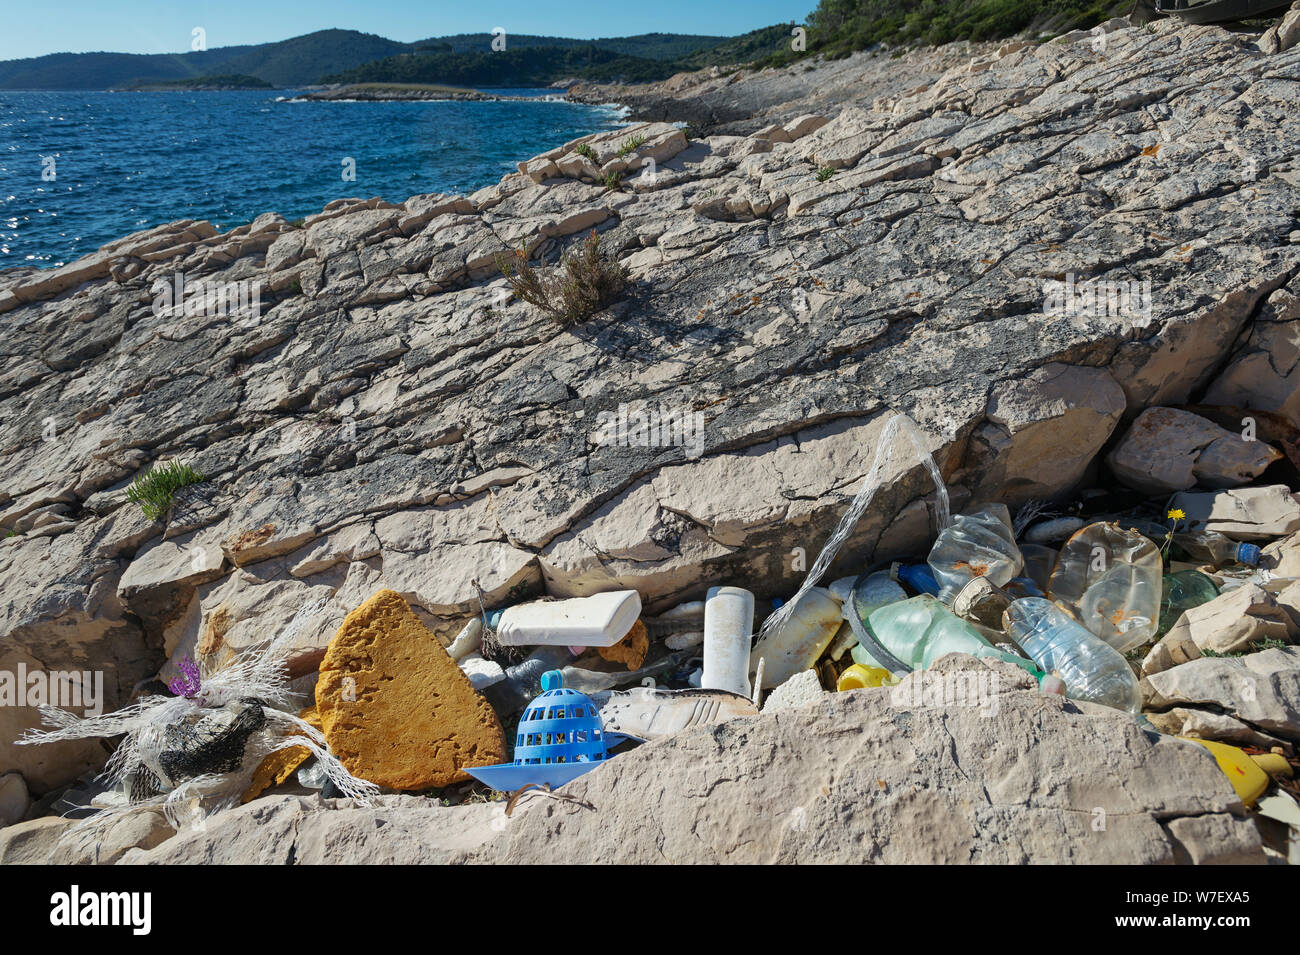 Marine debris accumulates heavily along seashores. Plastic bottles and other garbage washed out on coast. Plastic waste tide, sea pollution. Stock Photo